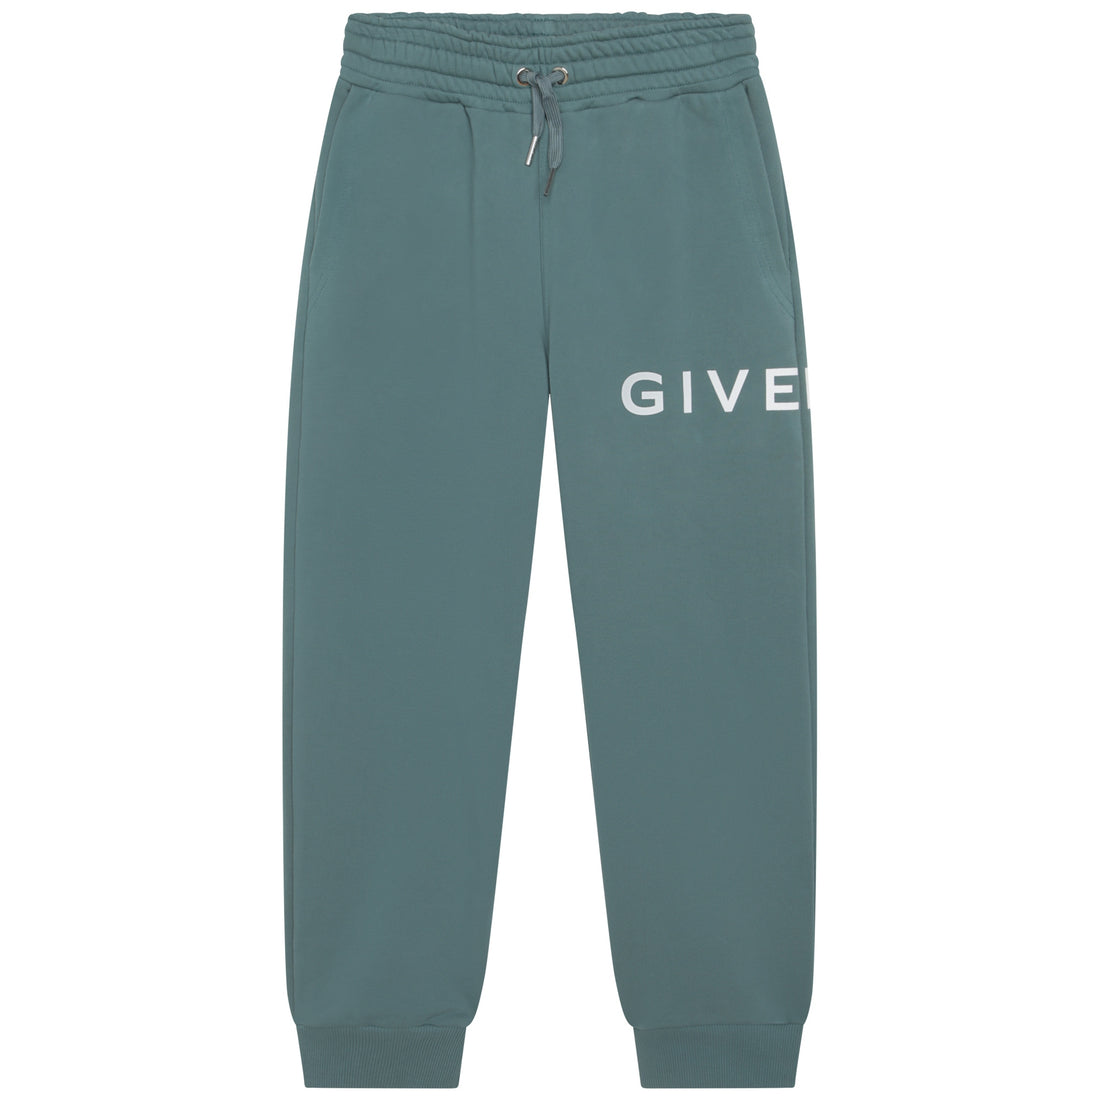 Givenchy Jogging Bottoms Style: H24231